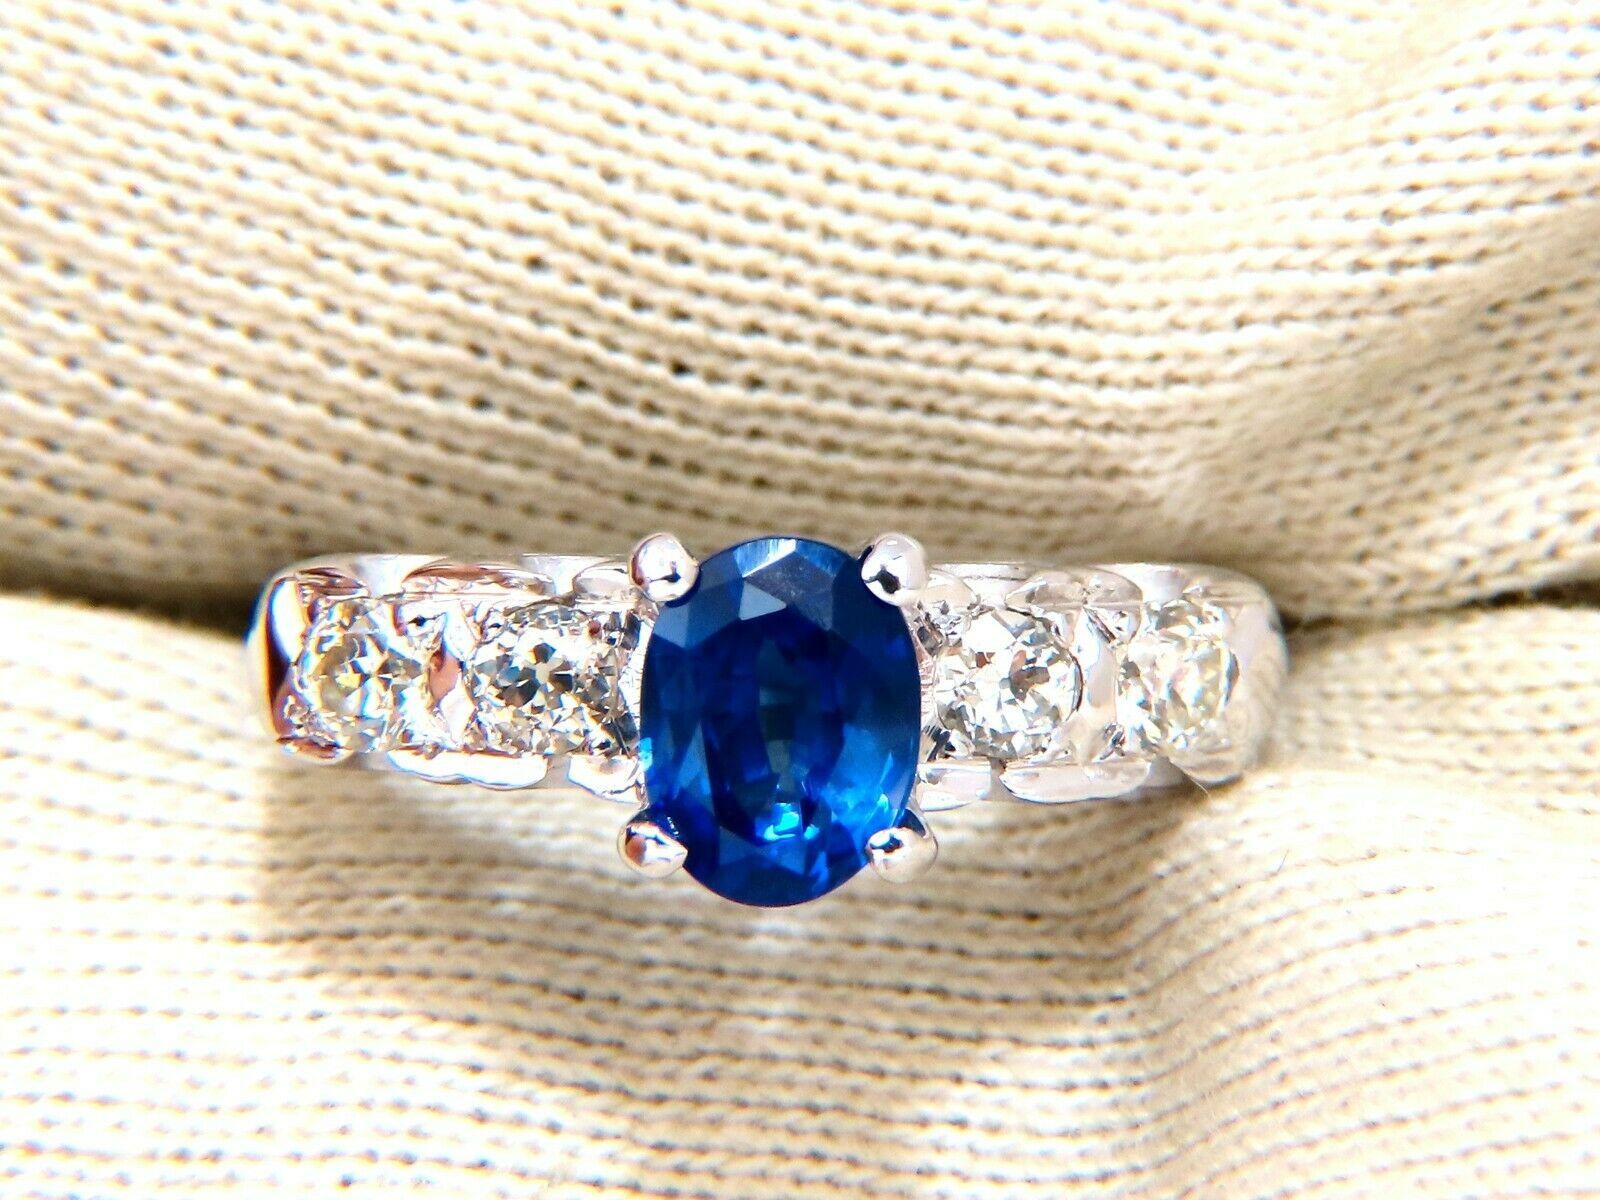 GIA Certified: 1.36ct.

Natural blue sapphire ring.

Full cut brilliant oval cut Clean clarity Transparent and vibrant

top Bright Gem Royal Blue

7.27 X 5.50 x 3.79mm

1.37ct. Natural Diamonds Rounds, full cut G-color vs-2 clarity

14kt. White gold